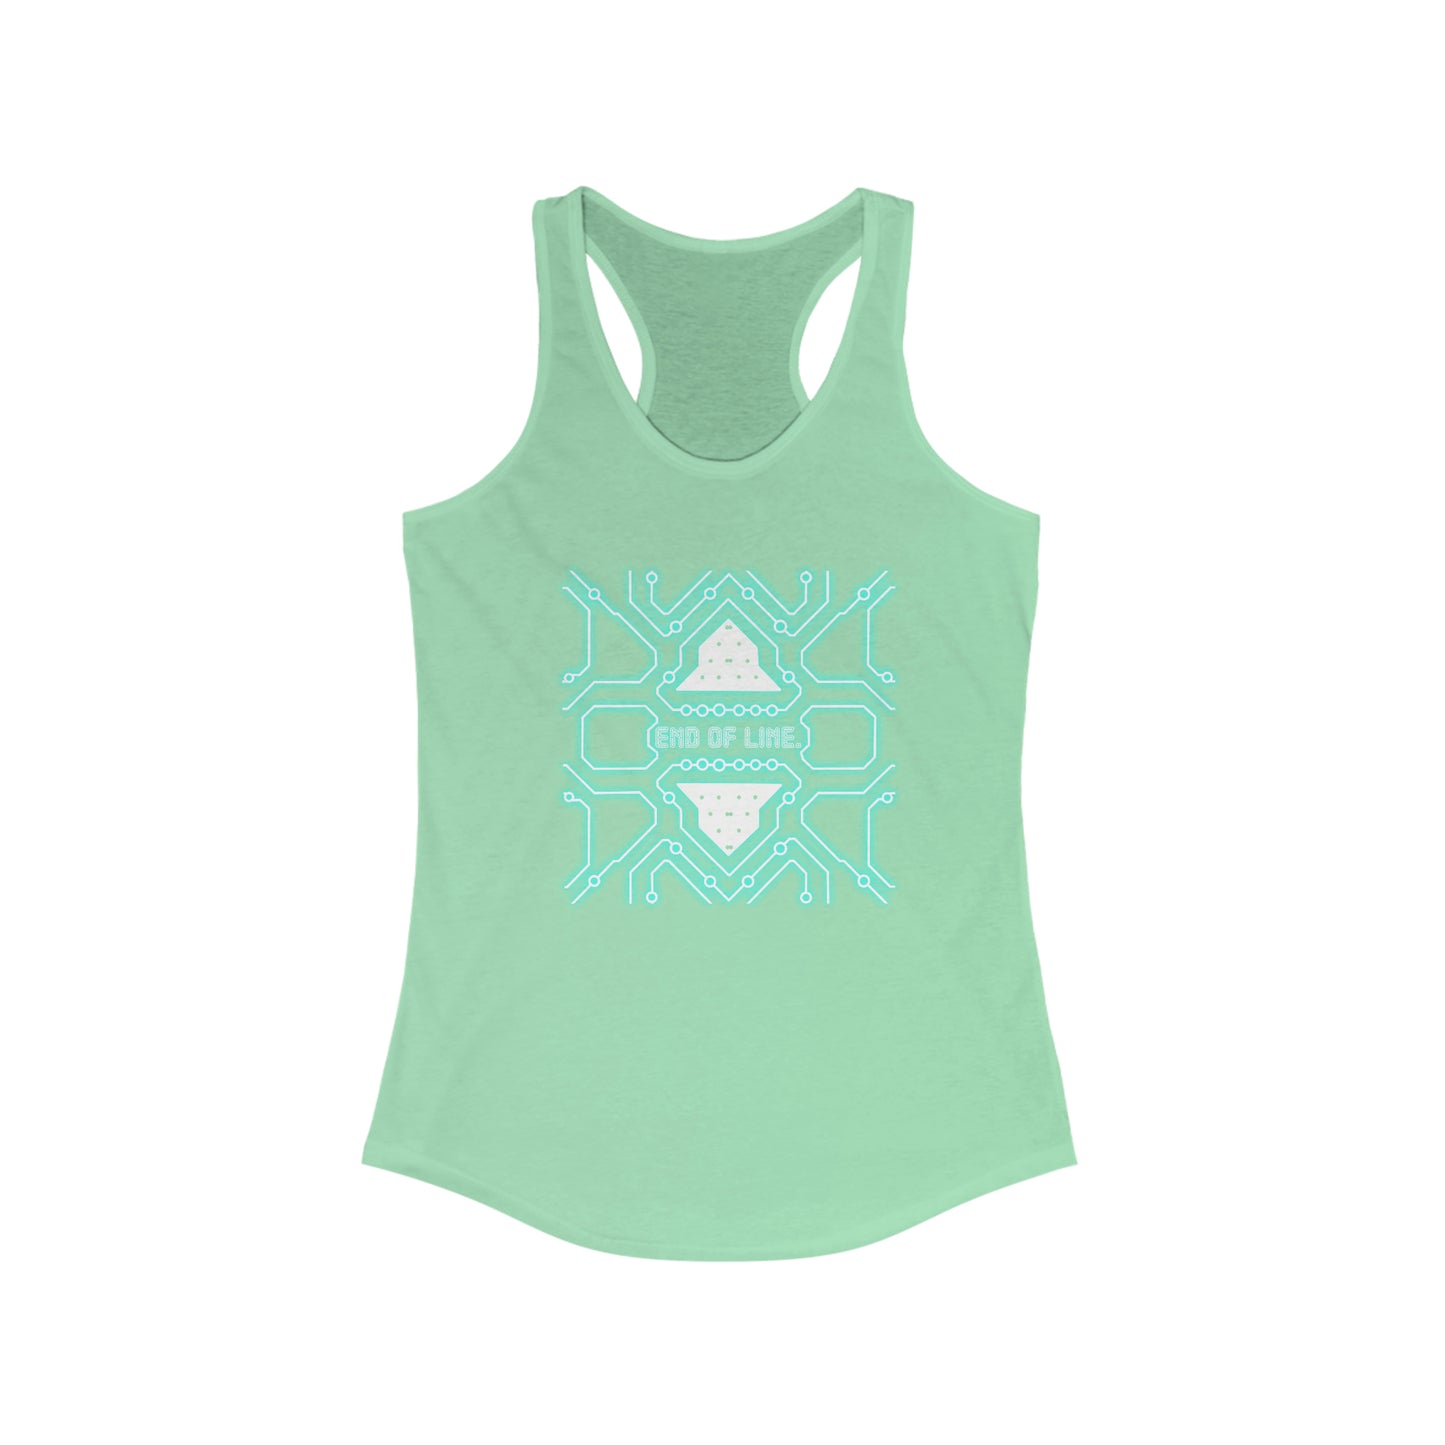 End Of Line Ideal Racerback Tank